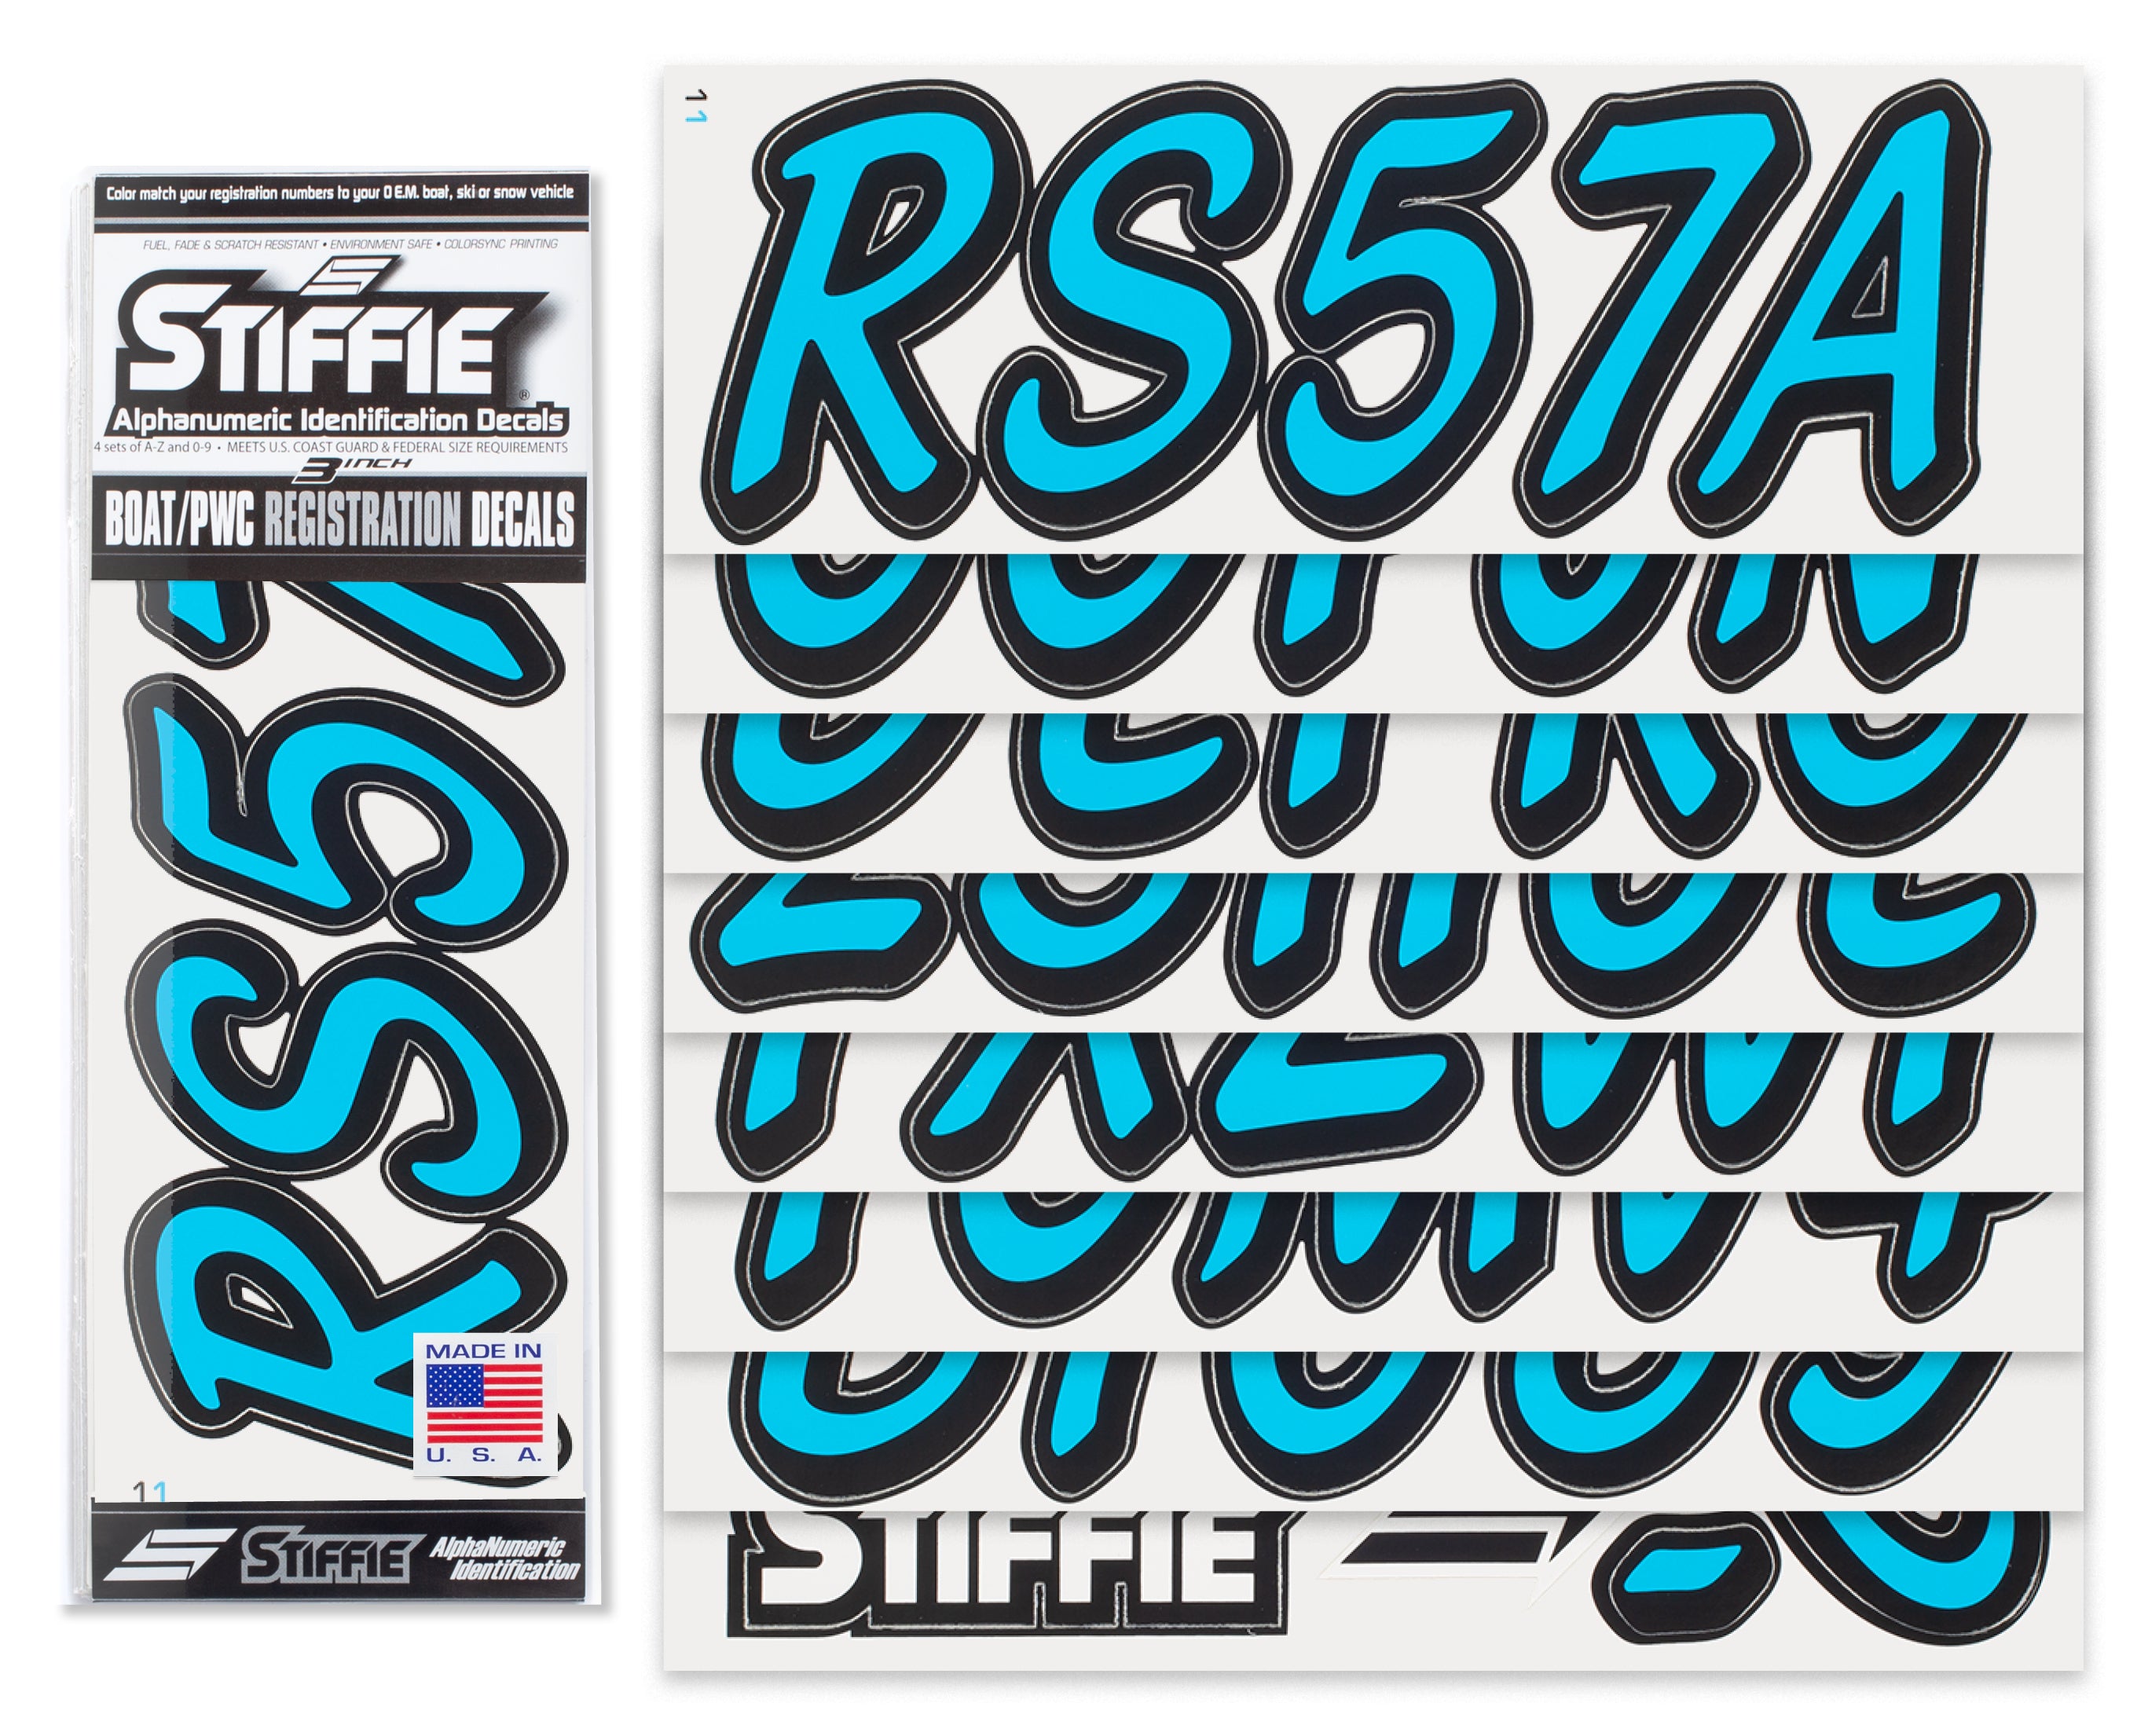 STIFFIE Whipline Solid Sky Blue/Black 3" Alpha-Numeric Registration Identification Numbers Stickers Decals for Boats & Personal Watercraft